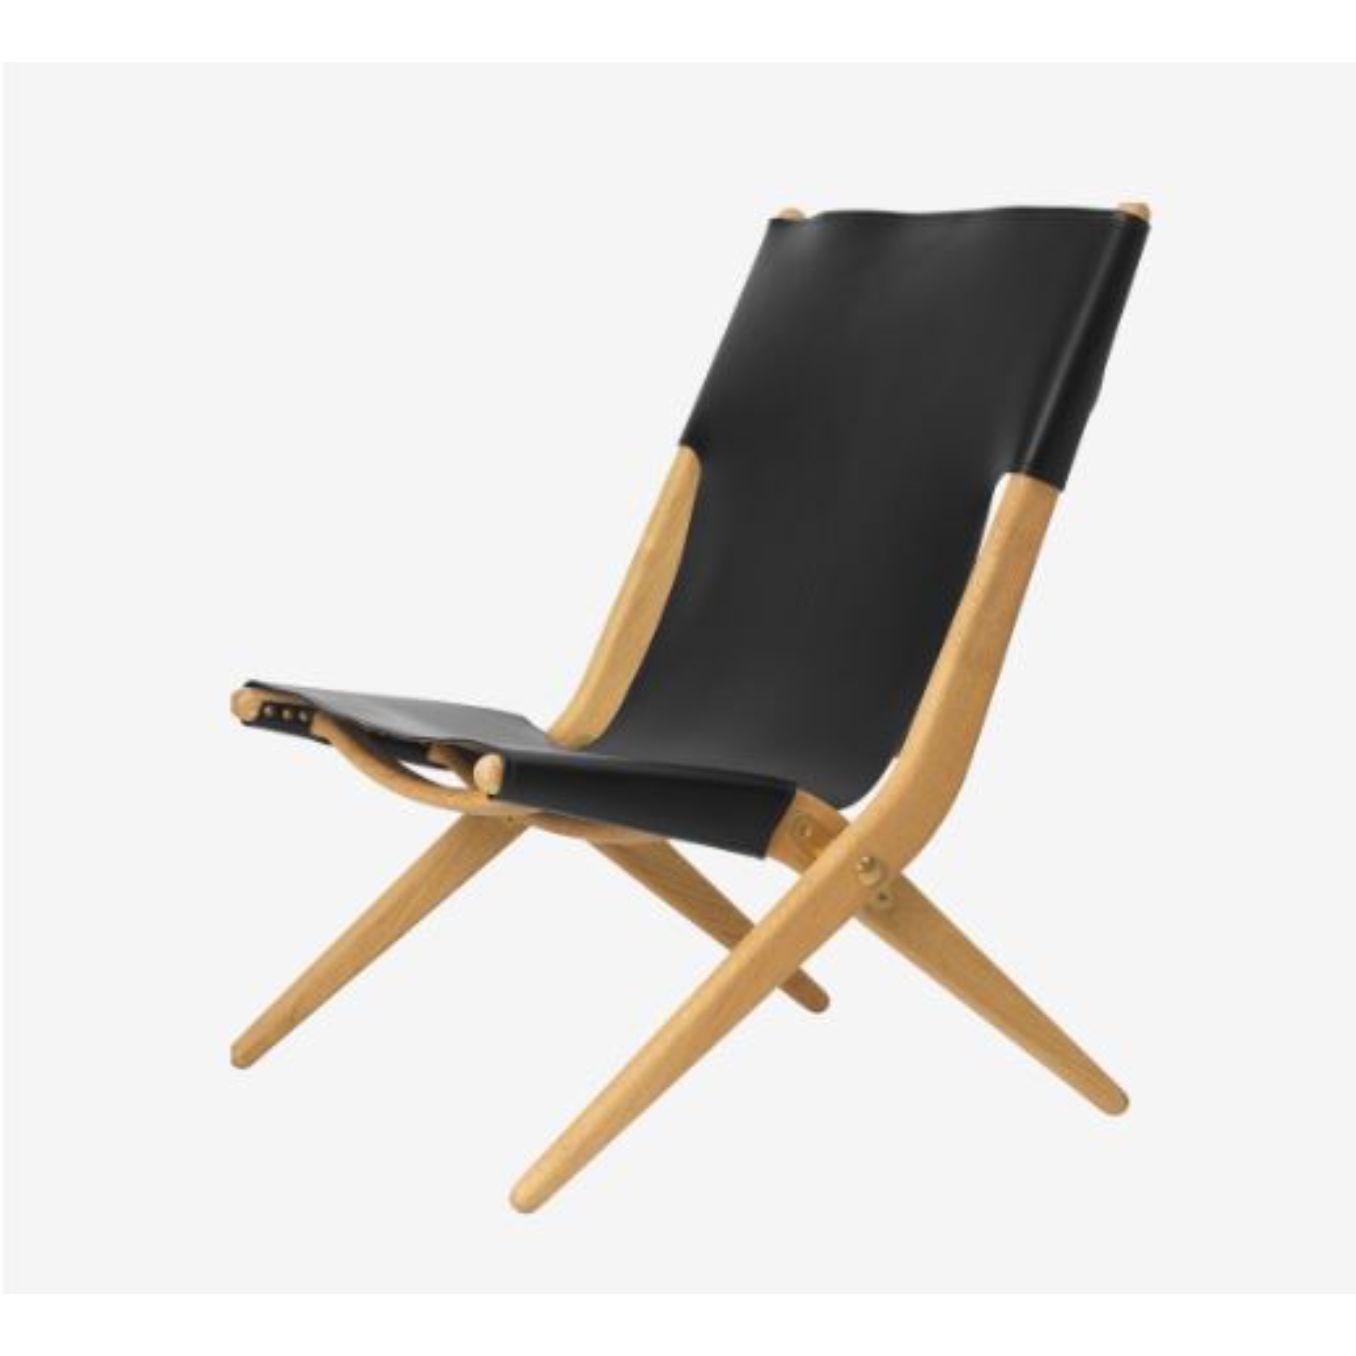 Oiled oak black leather saxe chair by Lassen
Dimensions: D 67 x W 60 x H 84 cm 
Materials: Leather, Wood, Oiled Oak
Also available in different colors and materials.
Weight: 13 Kg

Mogens Lassen was perceived as ‘the naughty boy in class’, but